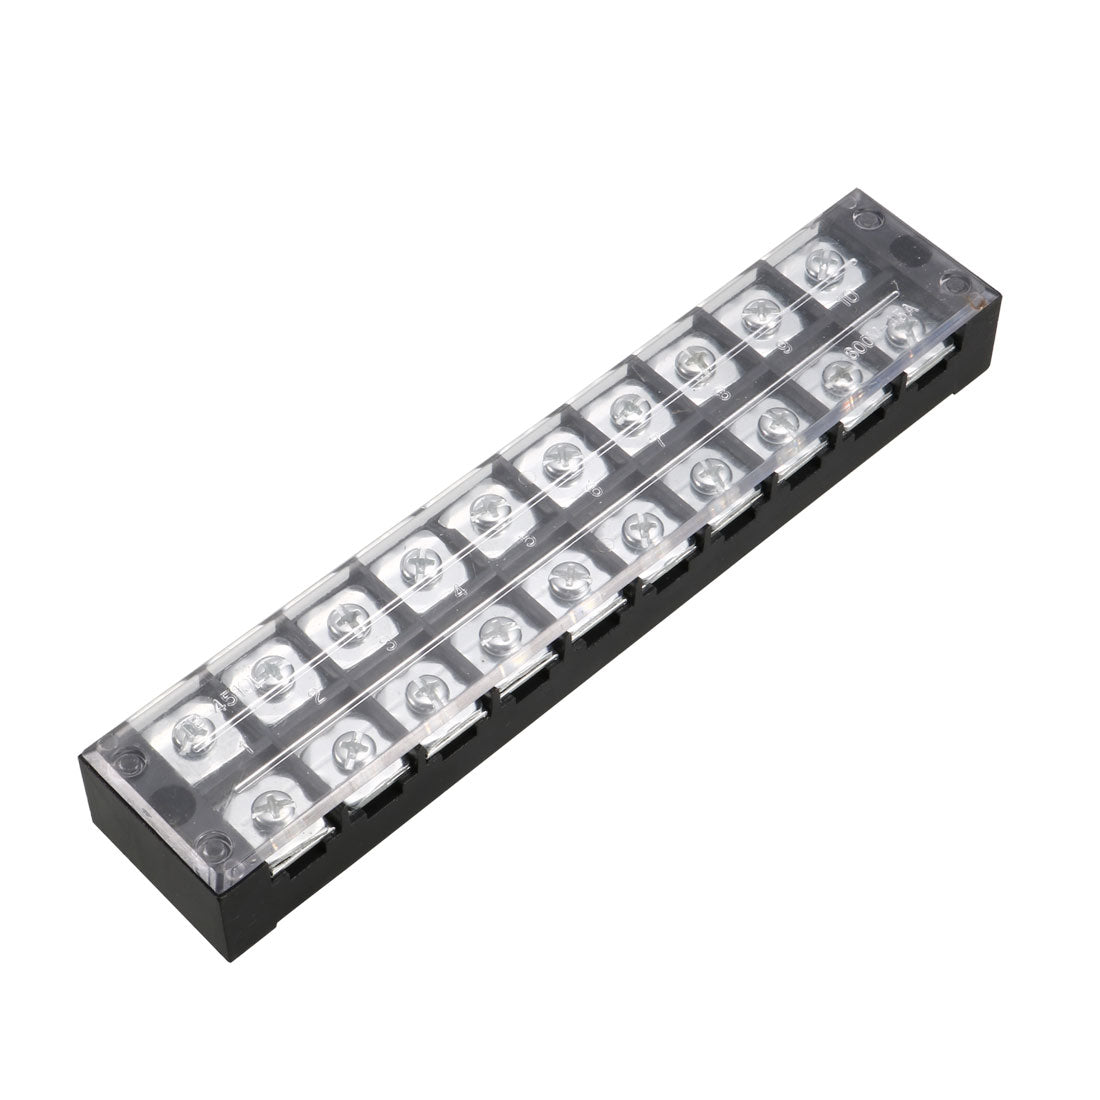 uxcell Uxcell Dual Rows 10 Positions 600V 45A Cable Barrier Block Terminal Strip TB-4510L